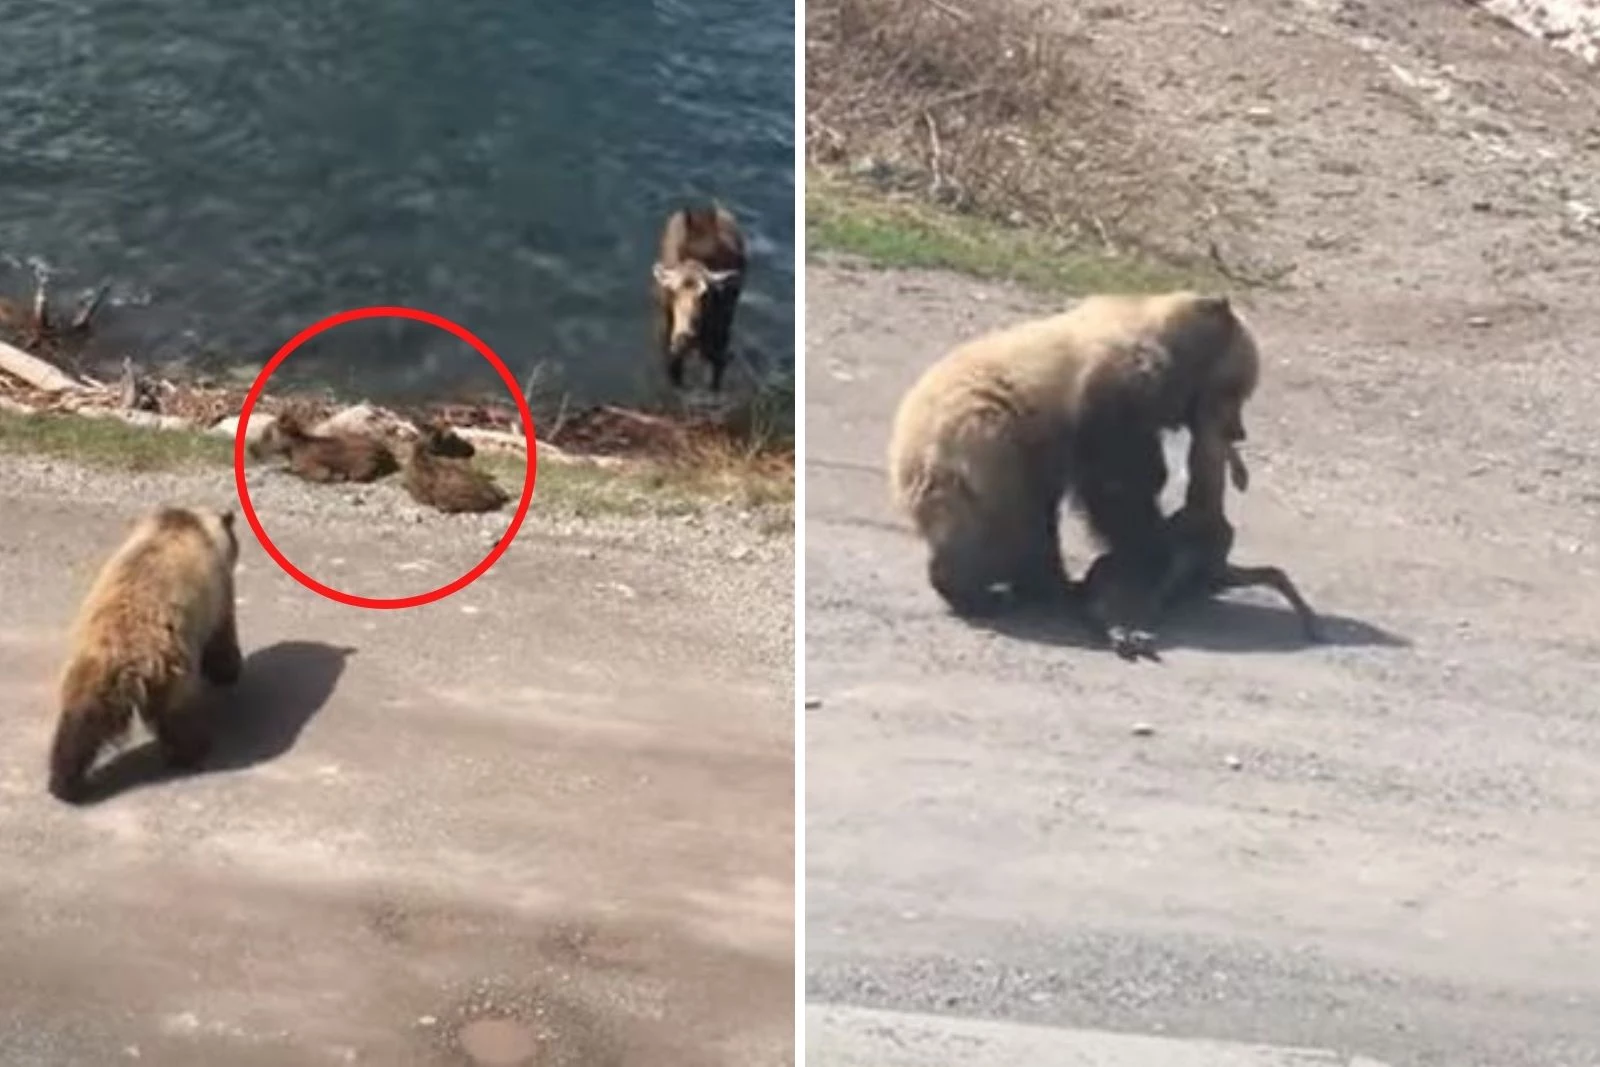 GRAPHIC: Video Shows Grizzly Bear Taking a Moose Calf in Montana